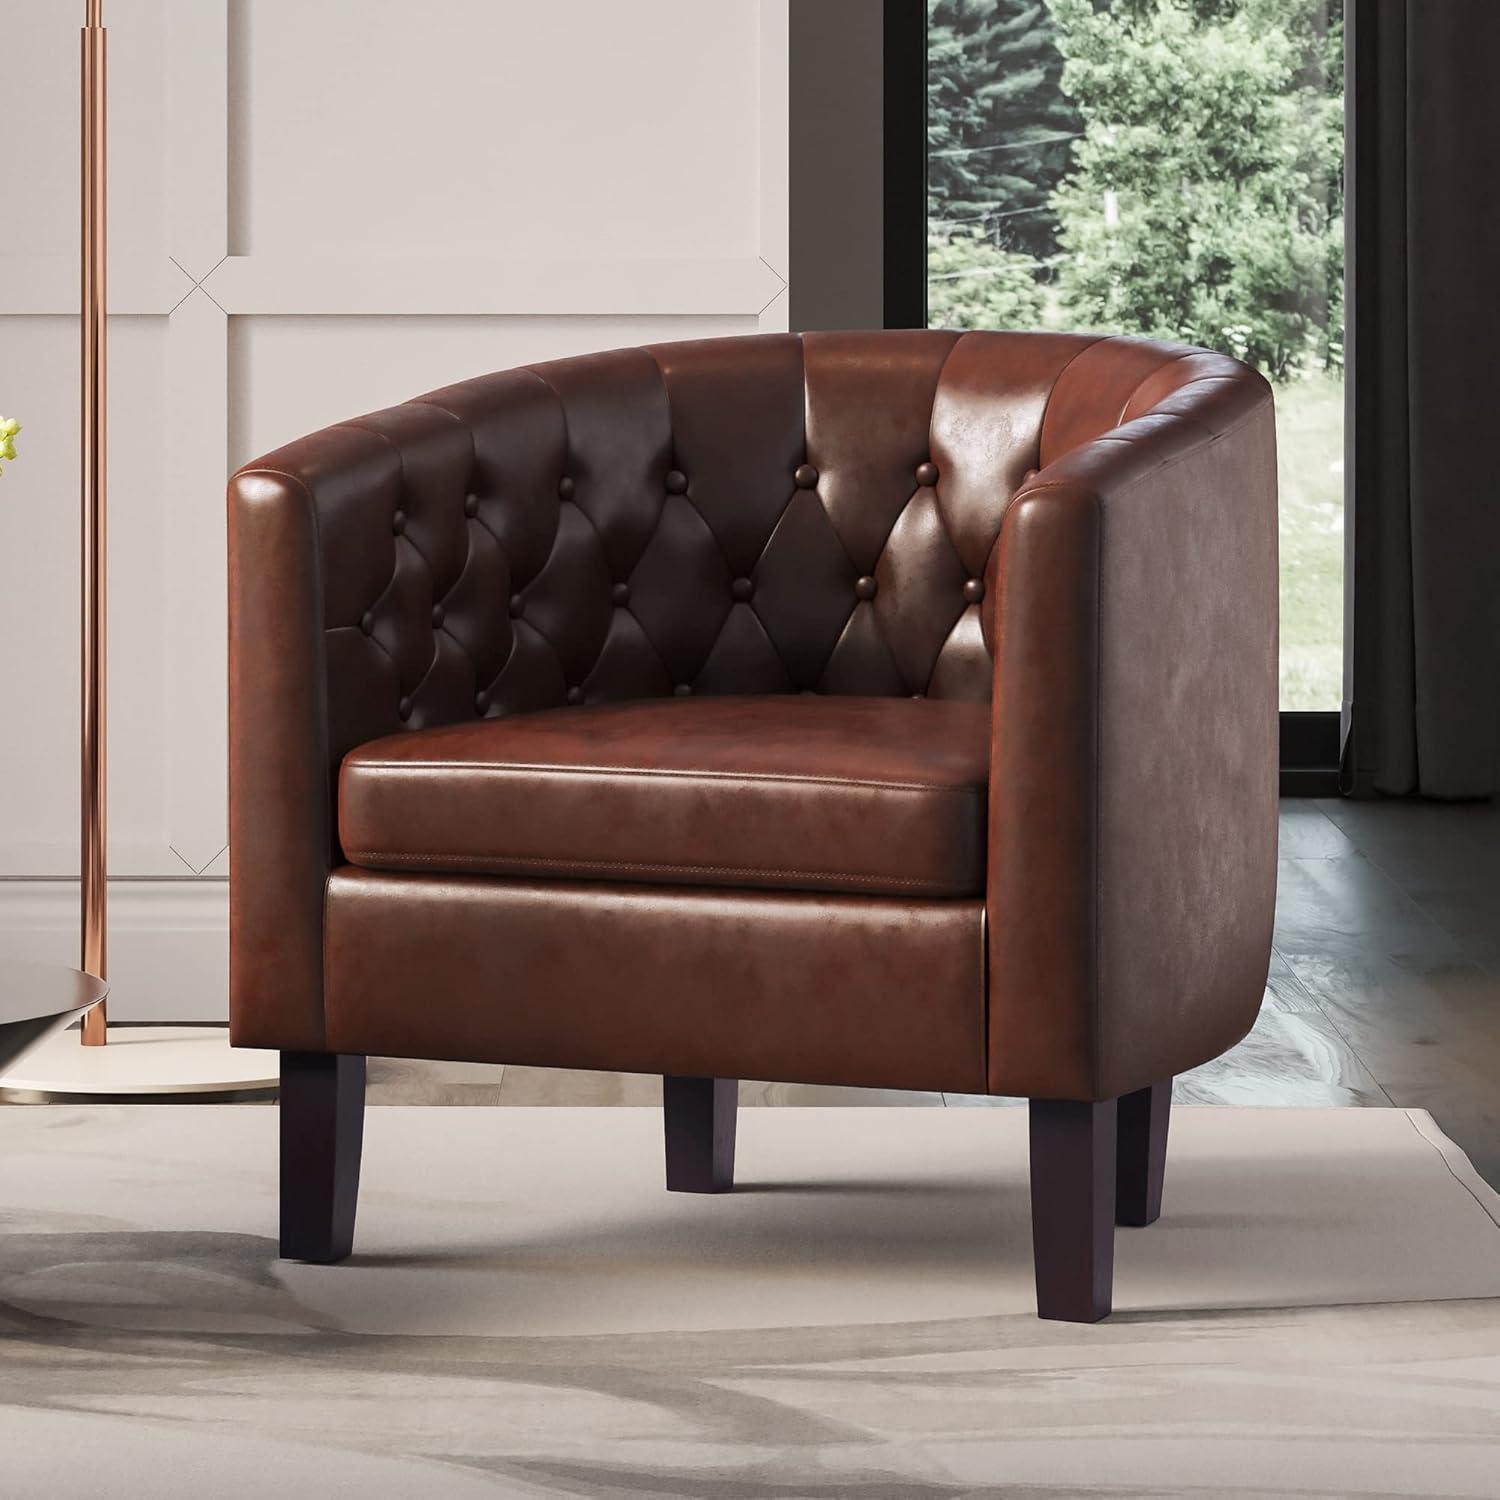 Berlinda Caramel Faux Leather Tufted Barrel Accent Chair